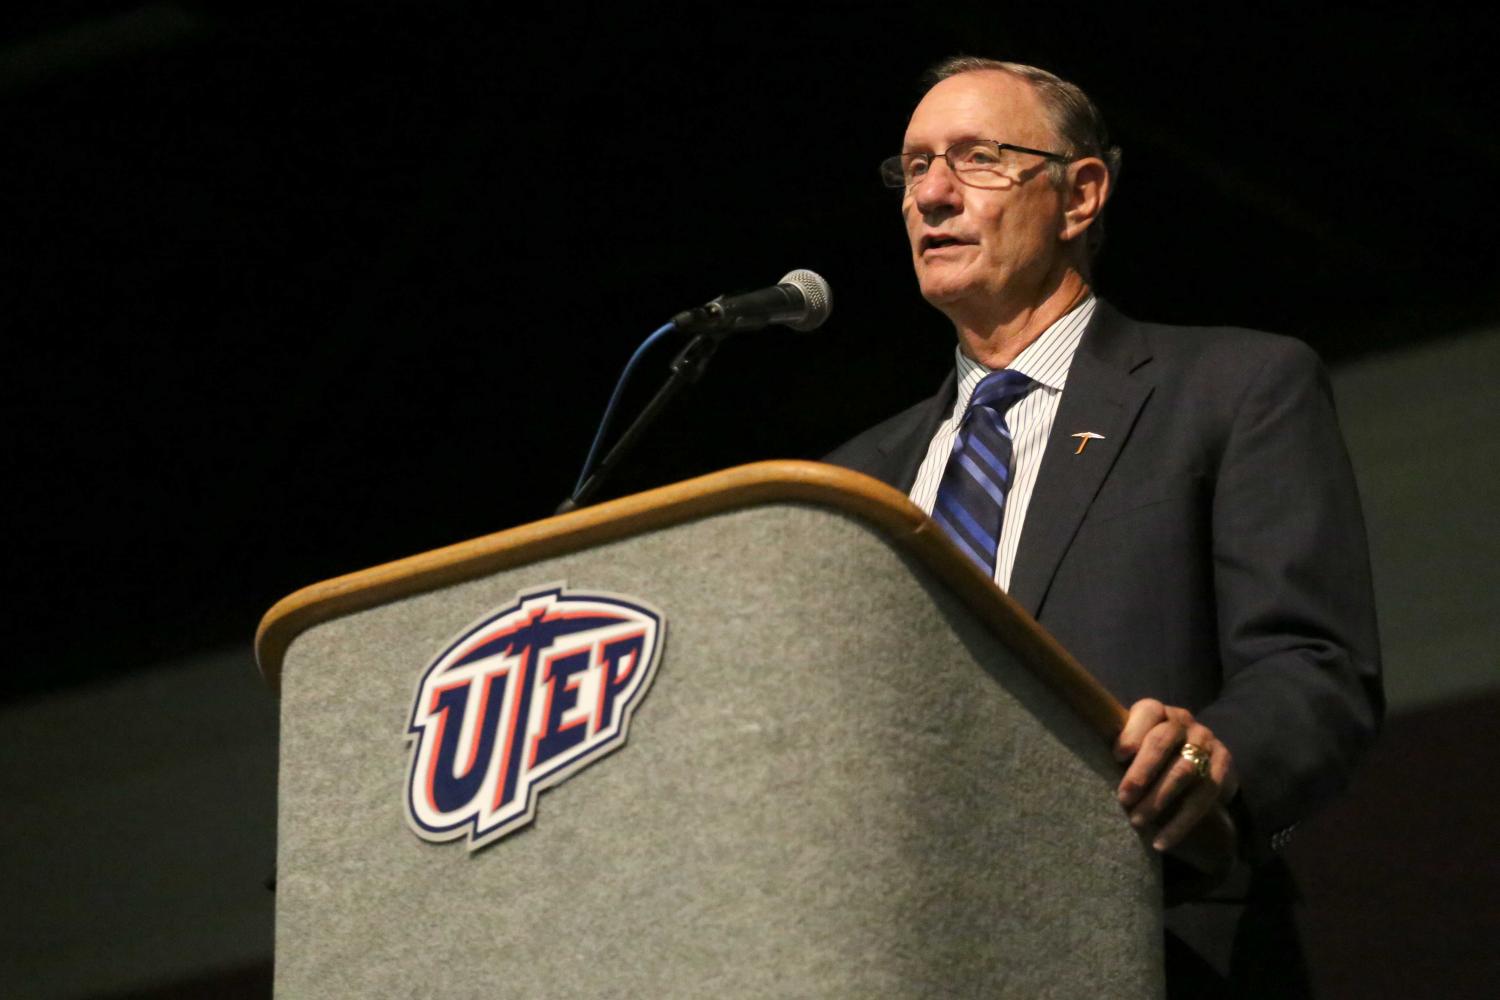 Athletics director Bob Stull announces retirement after 19 years